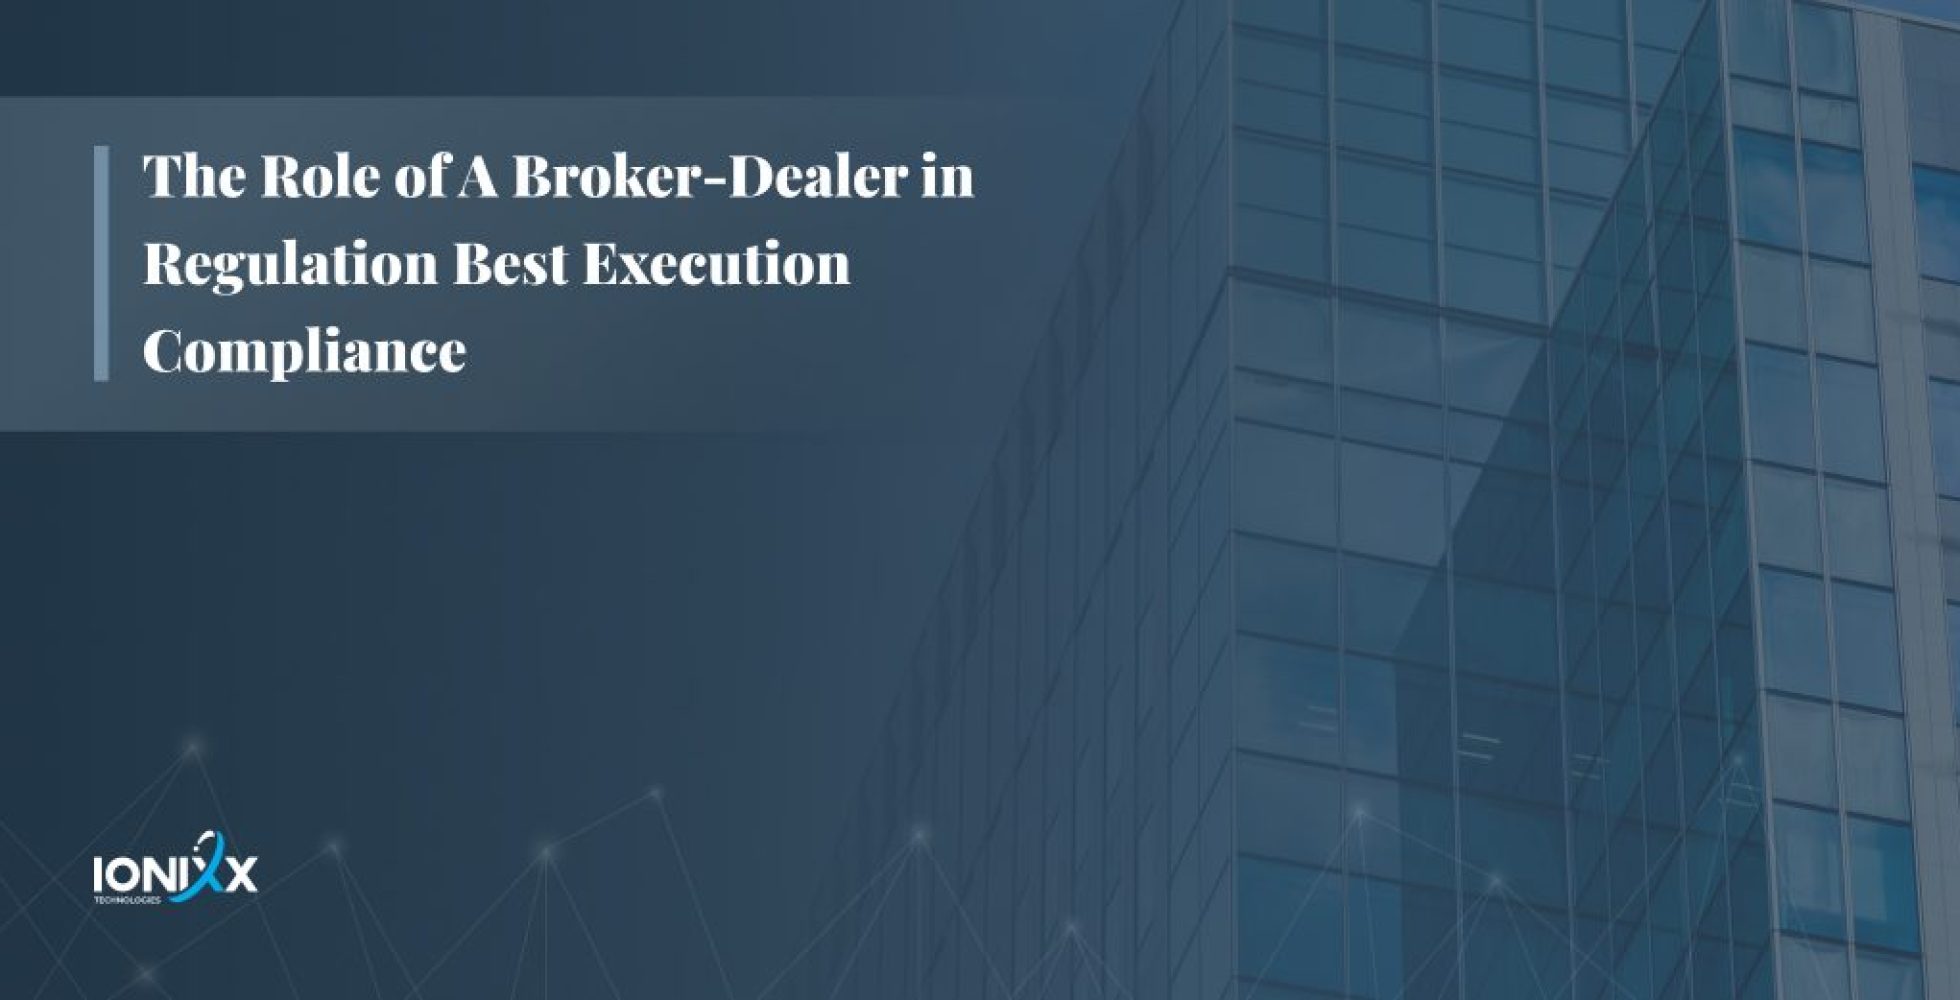 Regulation Best Execution And The Role of Broker-dealers in Compliance